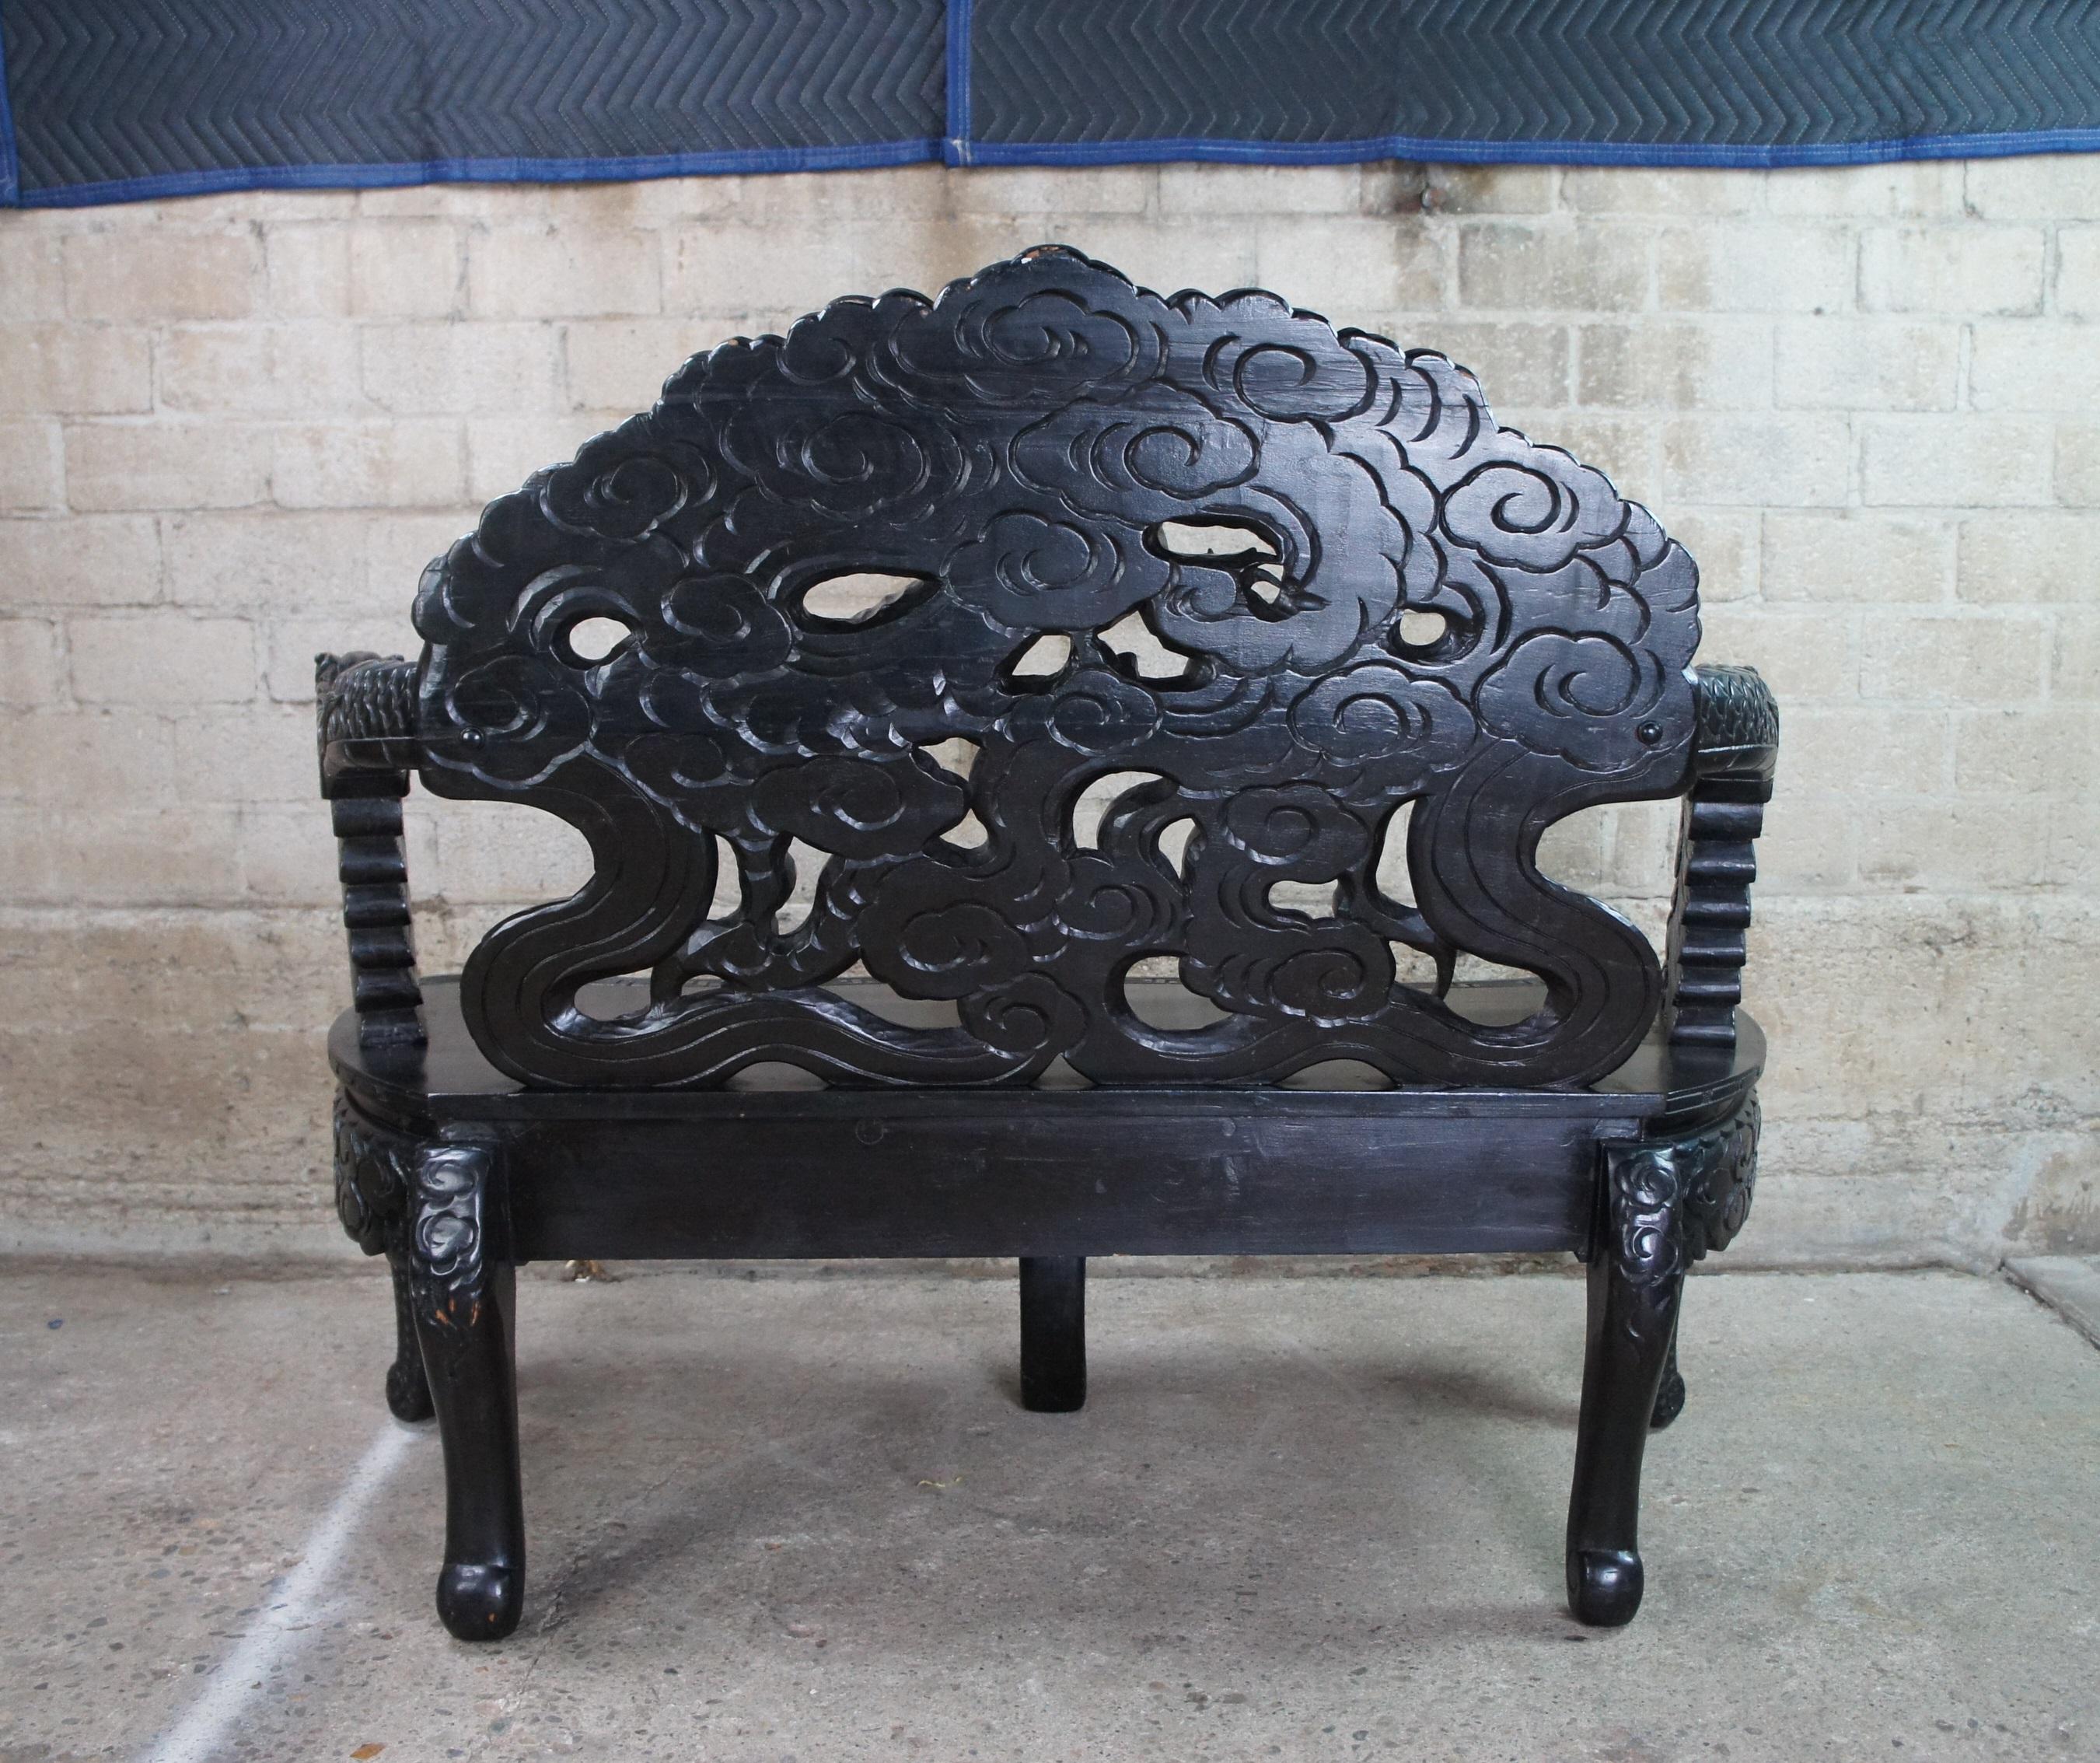 Antique Imperial Meiji Japanese Ebonized High Relief Carved Dragon Bench 3